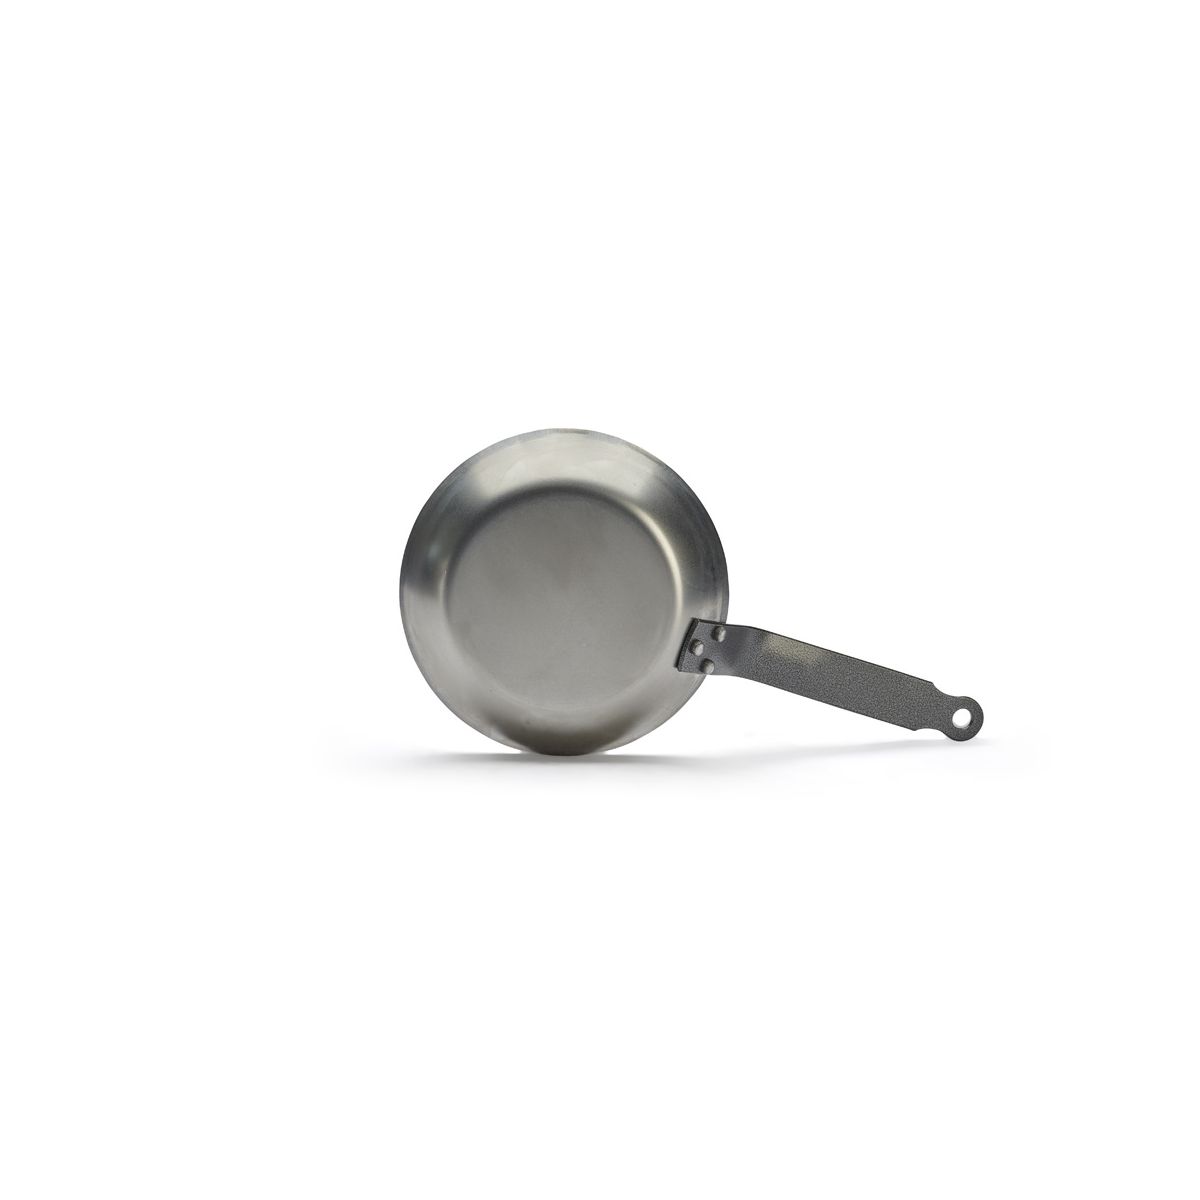 de Buyer 5130.28 Carbone Plus Round Frying Pan with Stainless Steel Cold Handle 28 cm Diameter